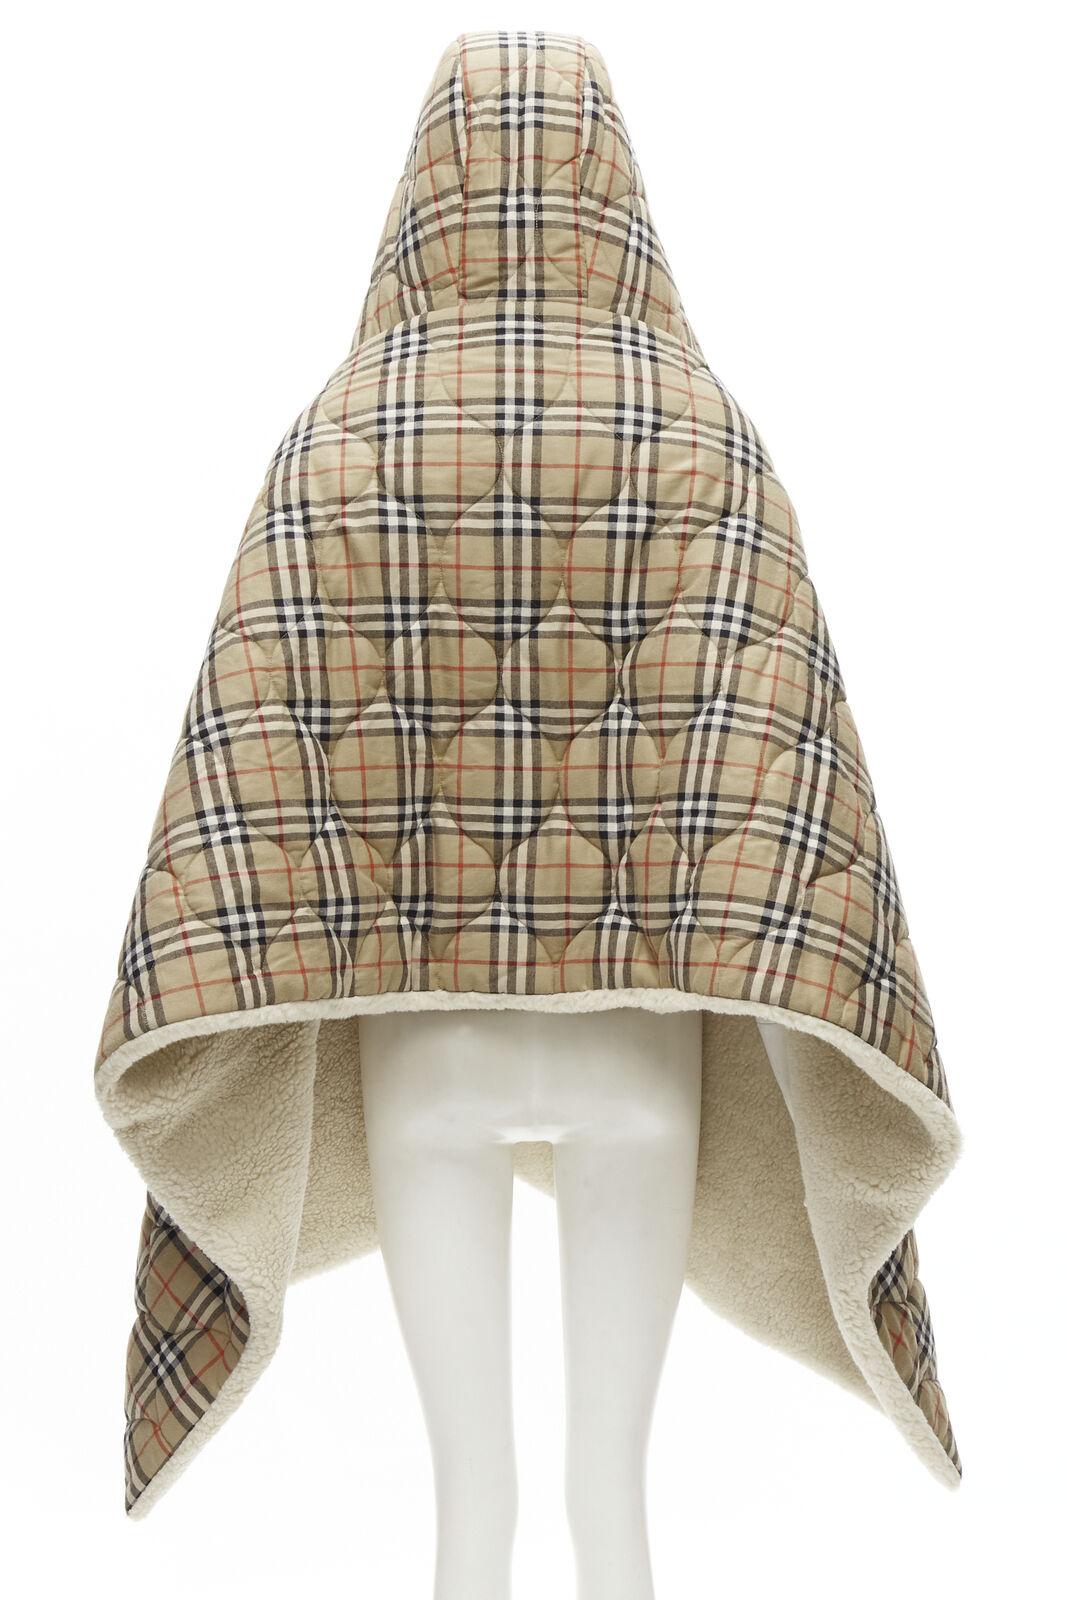 new BURBERRY RICCARDO TISCI Check flannel fleece hooded padded stole shawl 6